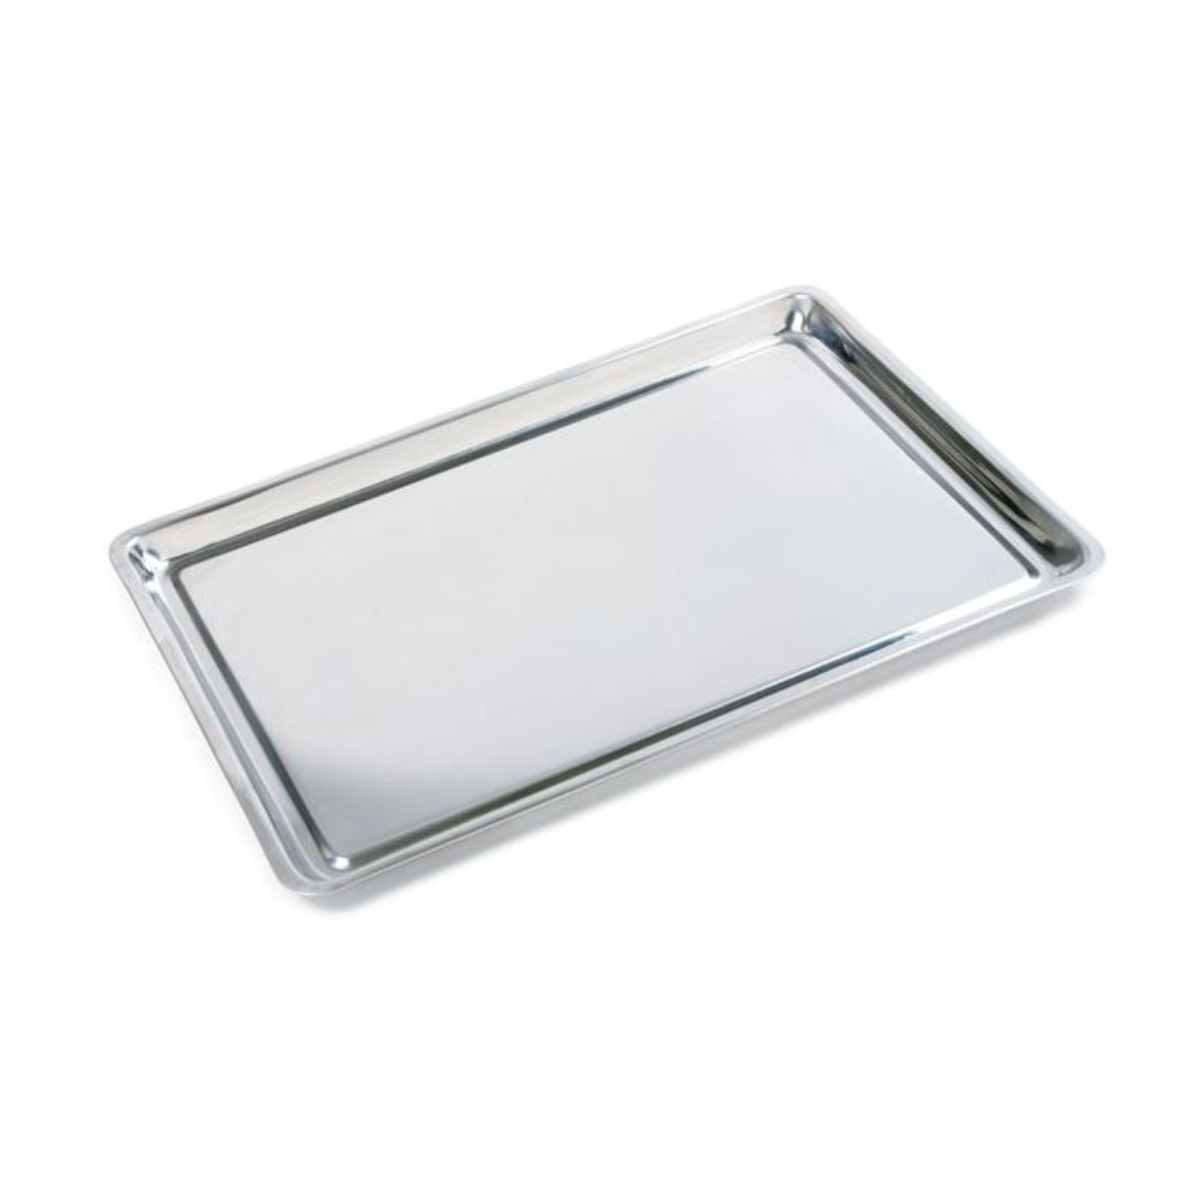 Norpro Stainless Steel Jelly Roll Baking Pan 10x15x1/2